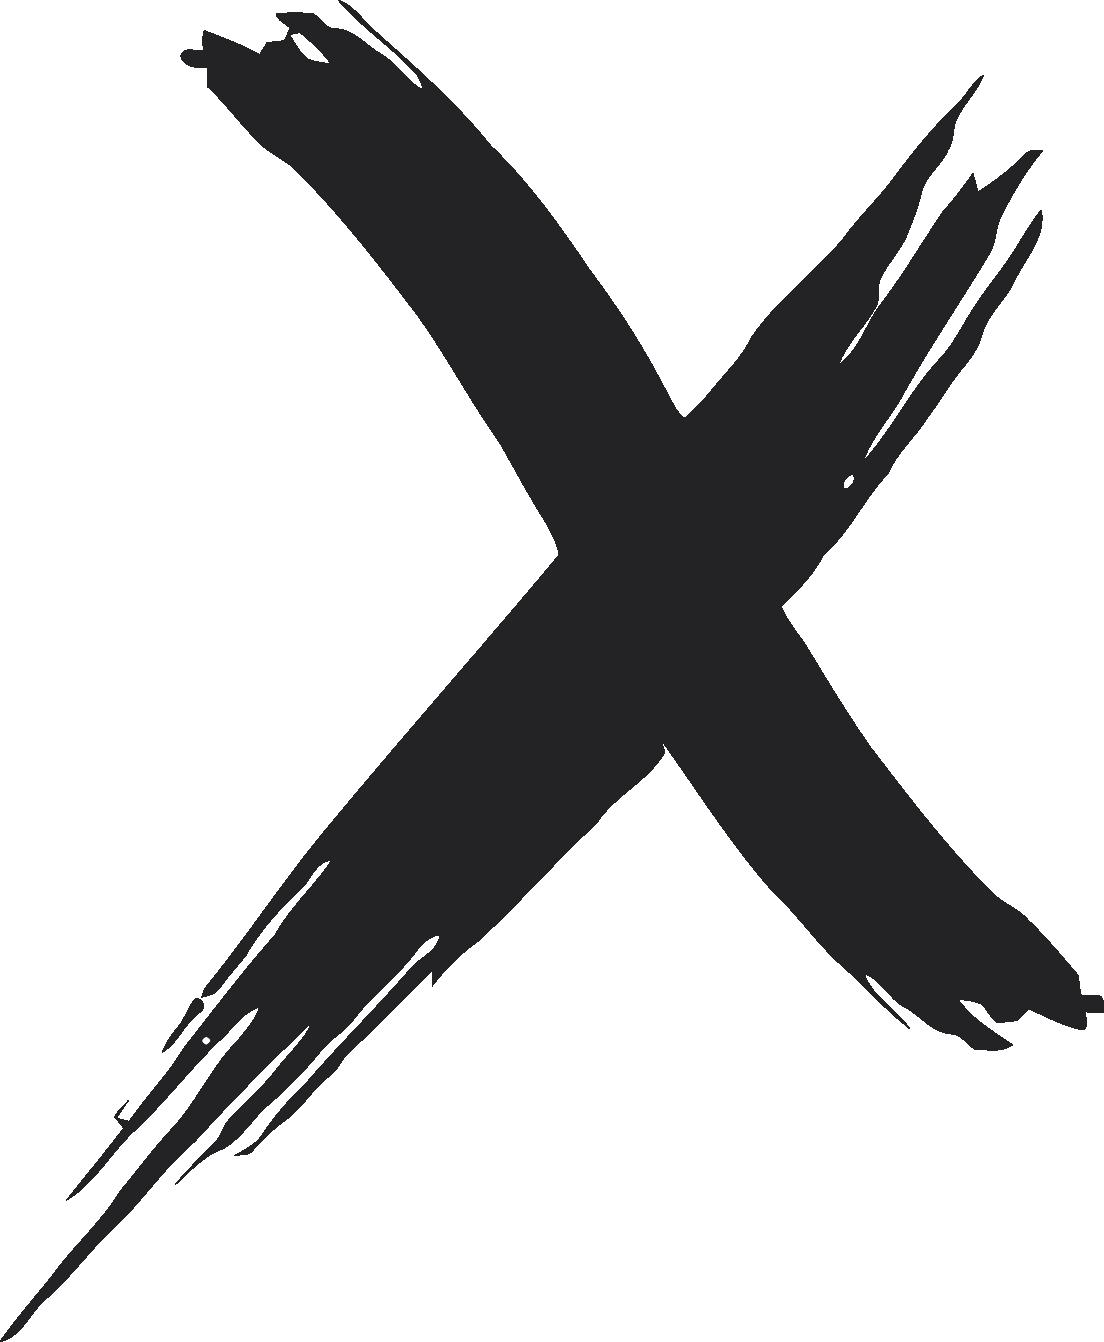 Download X Letter HQ Image Free HQ PNG Image